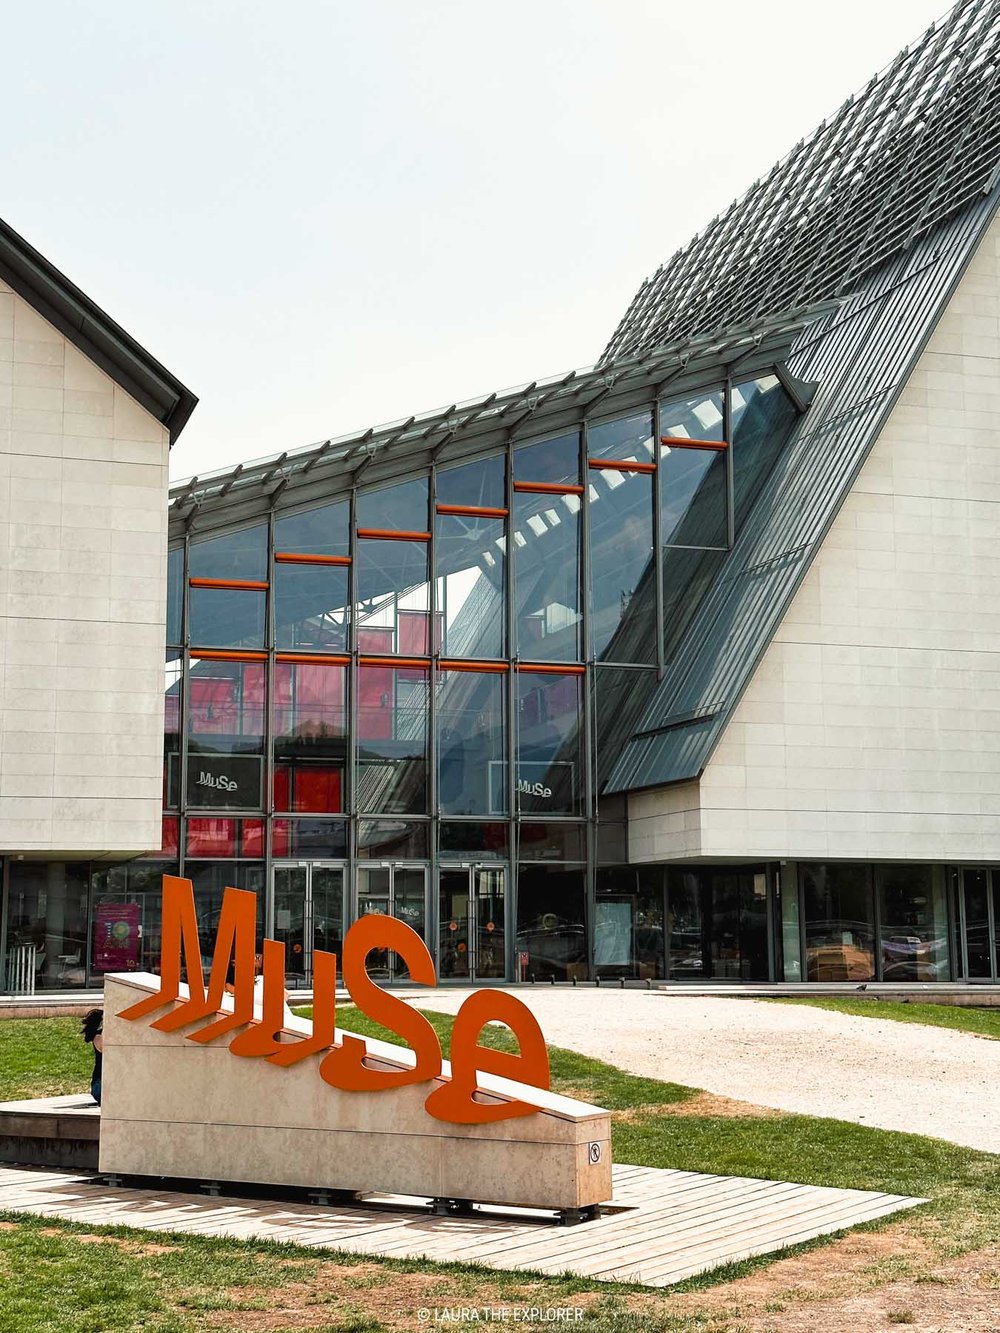 MUSE science museum in trento